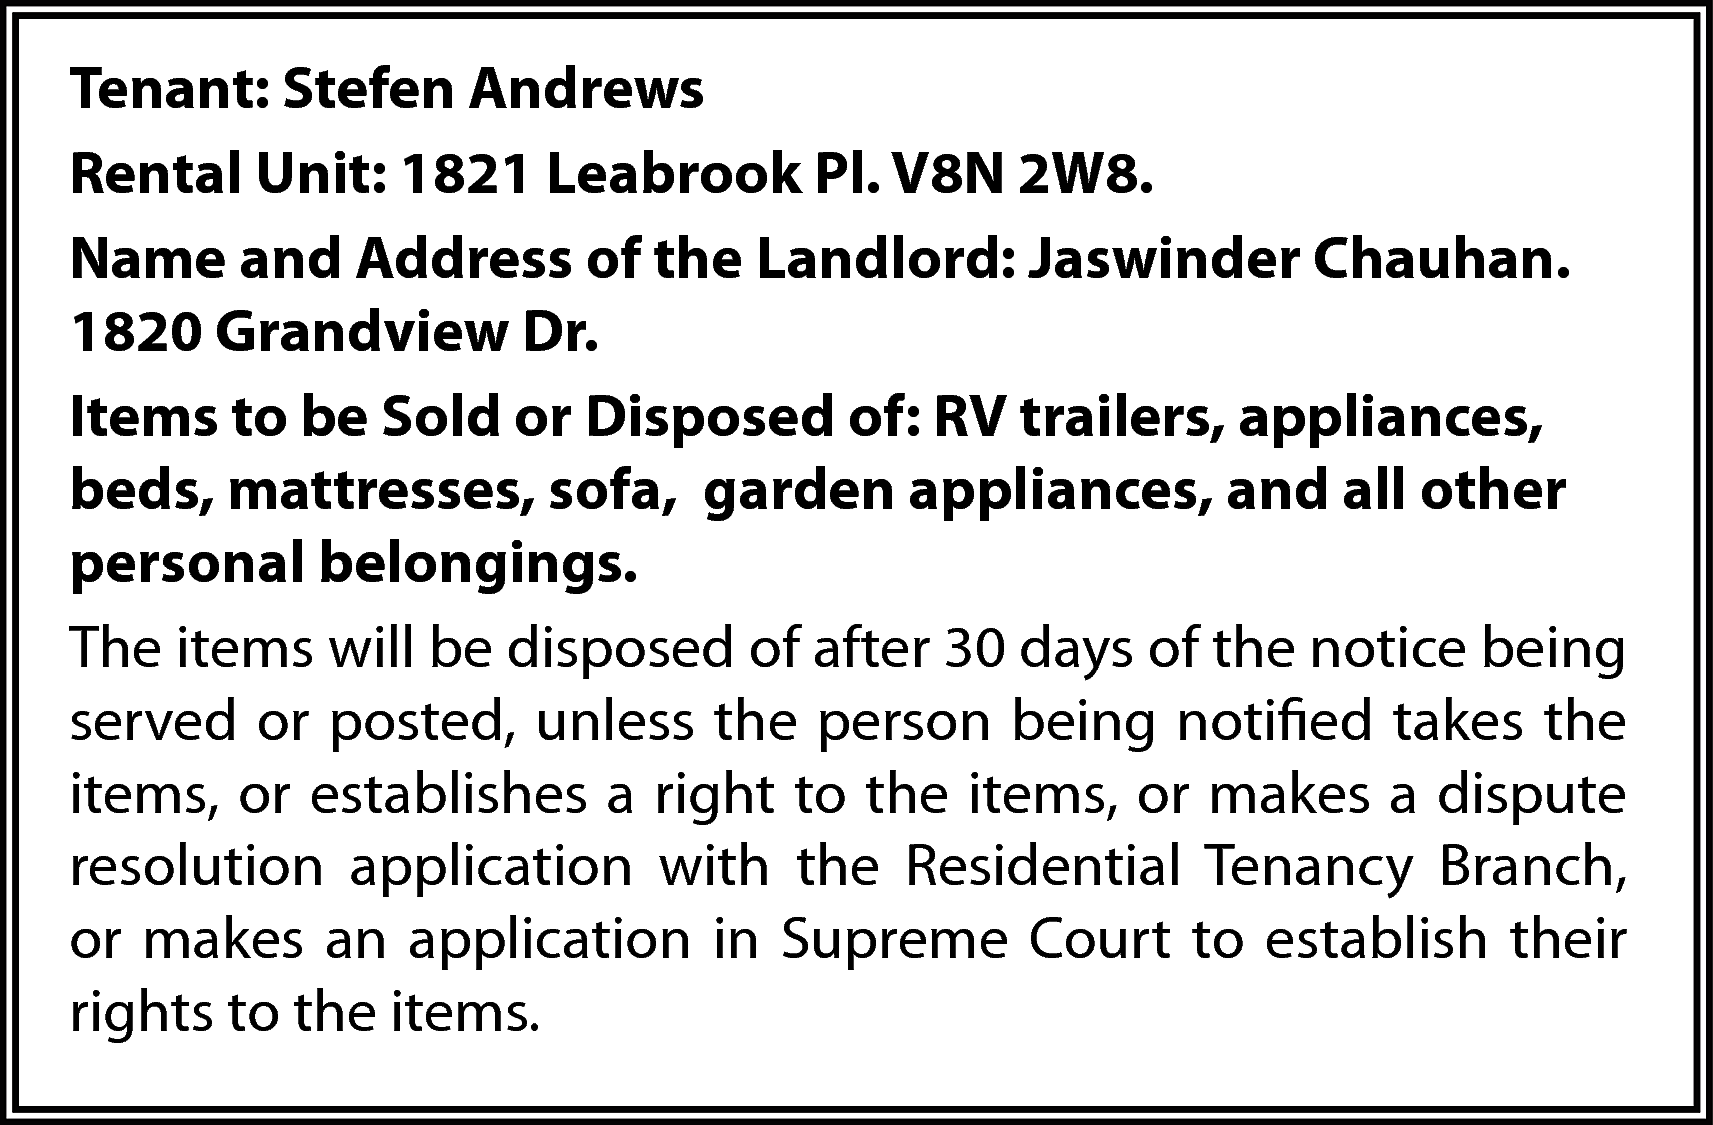 Tenant: Stefen Andrews <br>Rental Unit:  Tenant: Stefen Andrews  Rental Unit: 1821 Leabrook Pl. V8N 2W8.  Name and Address of the Landlord: Jaswinder Chauhan.  1820 Grandview Dr.  Items to be Sold or Disposed of: RV trailers, appliances,  beds, mattresses, sofa, garden appliances, and all other  personal belongings.  The items will be disposed of after 30 days of the notice being  served or posted, unless the person being notified takes the  items, or establishes a right to the items, or makes a dispute  resolution application with the Residential Tenancy Branch,  or makes an application in Supreme Court to establish their  rights to the items.    